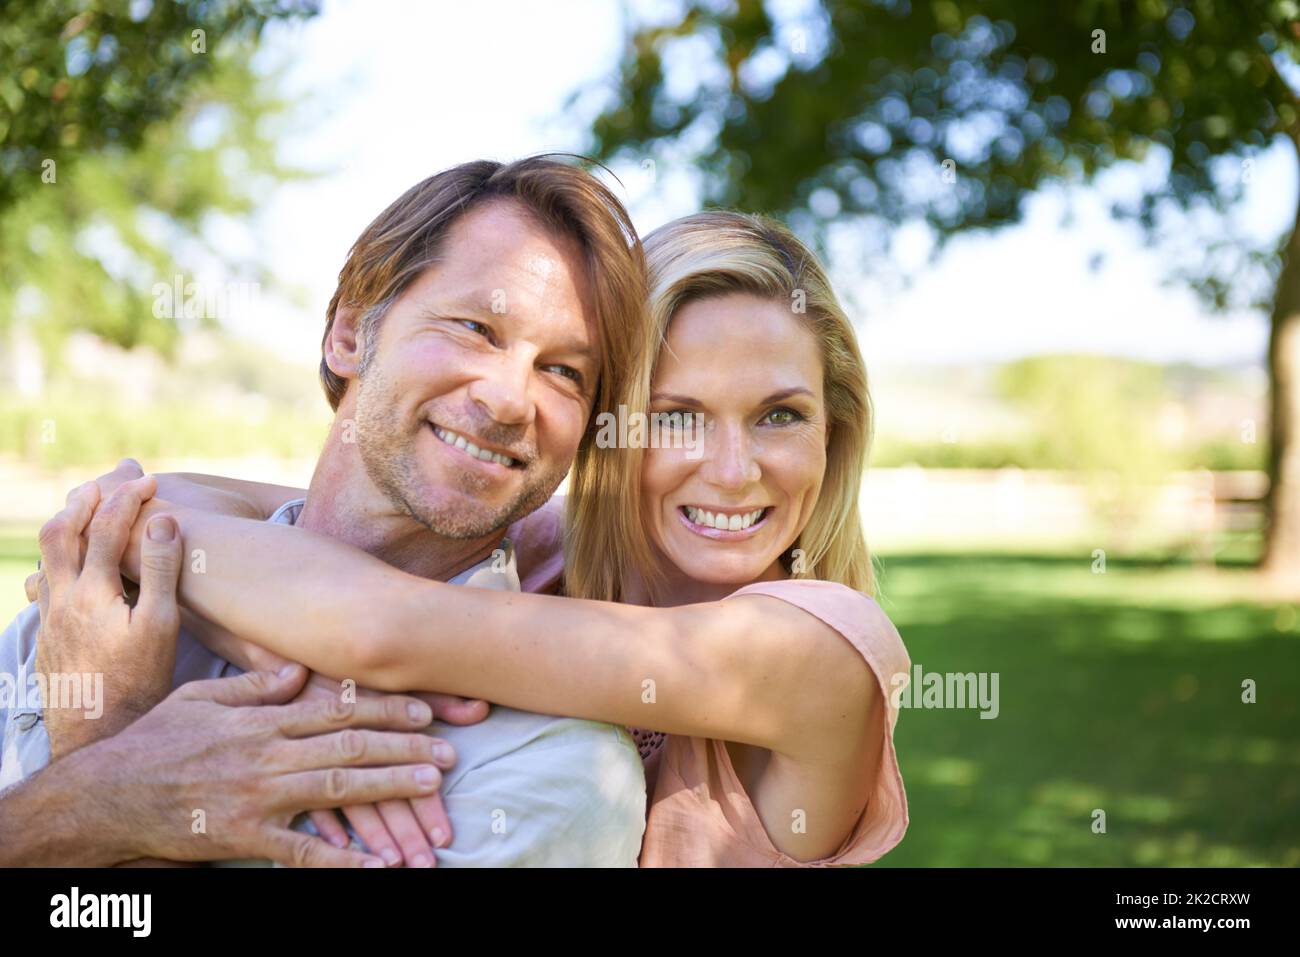 Hes my husband and best friend. Portrait of an affectionate mature couple enjoying a day in the park. Stock Photo